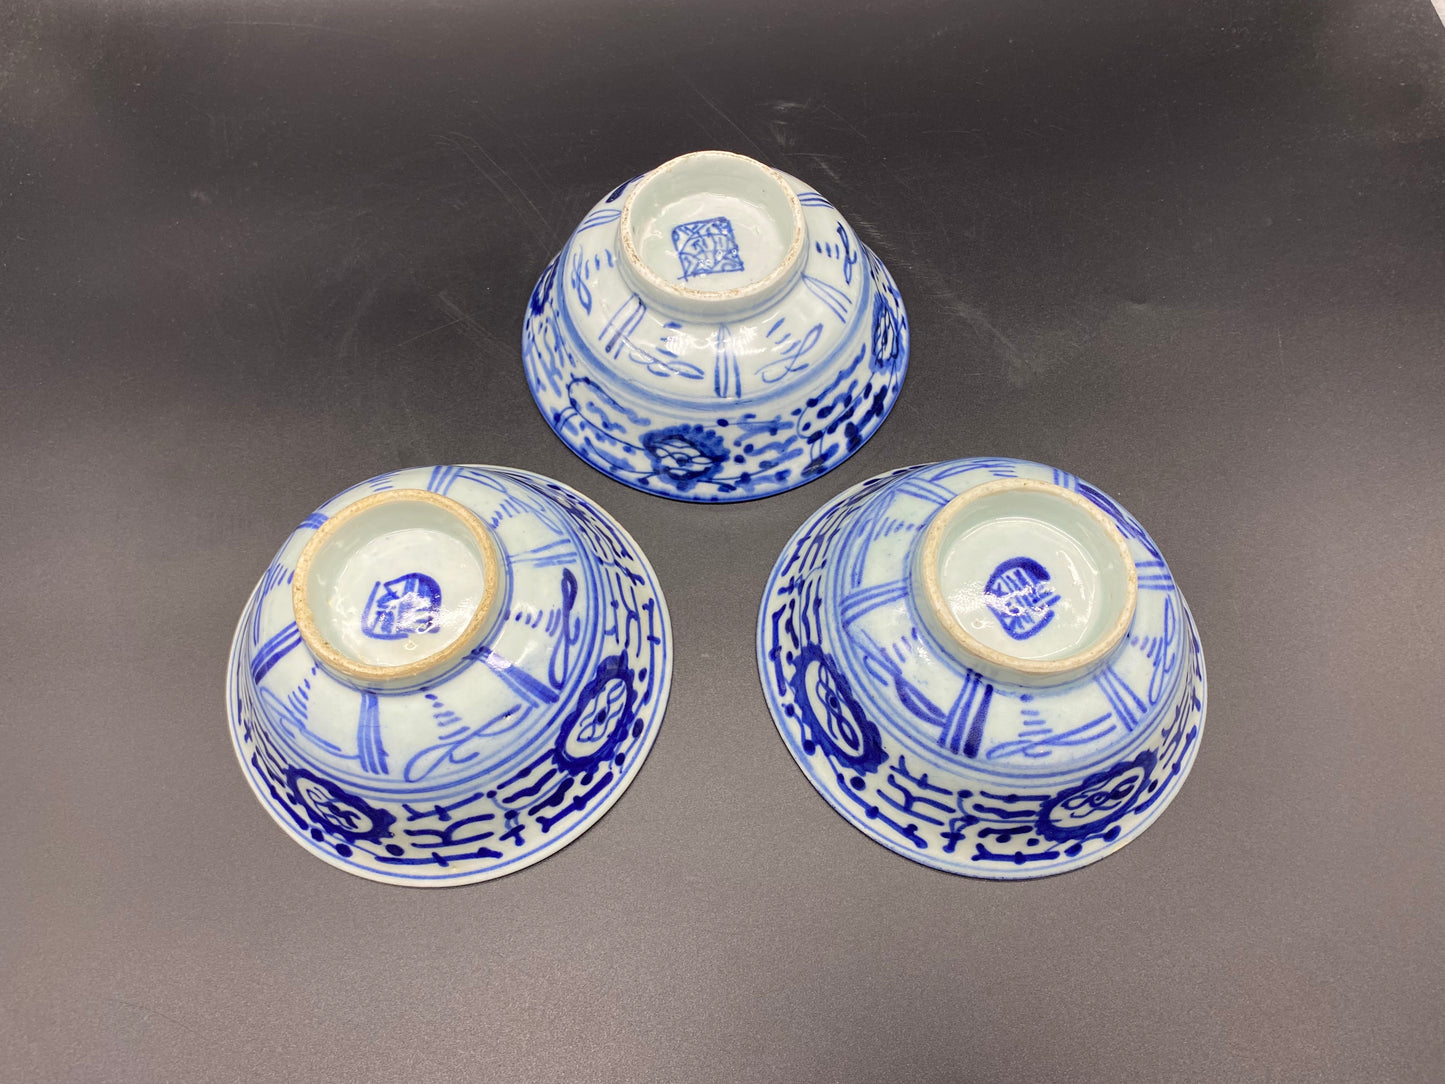 Foot of Bowls - Chinese Provencal Blue & White Qing Porcelain Bowls 18th Century 